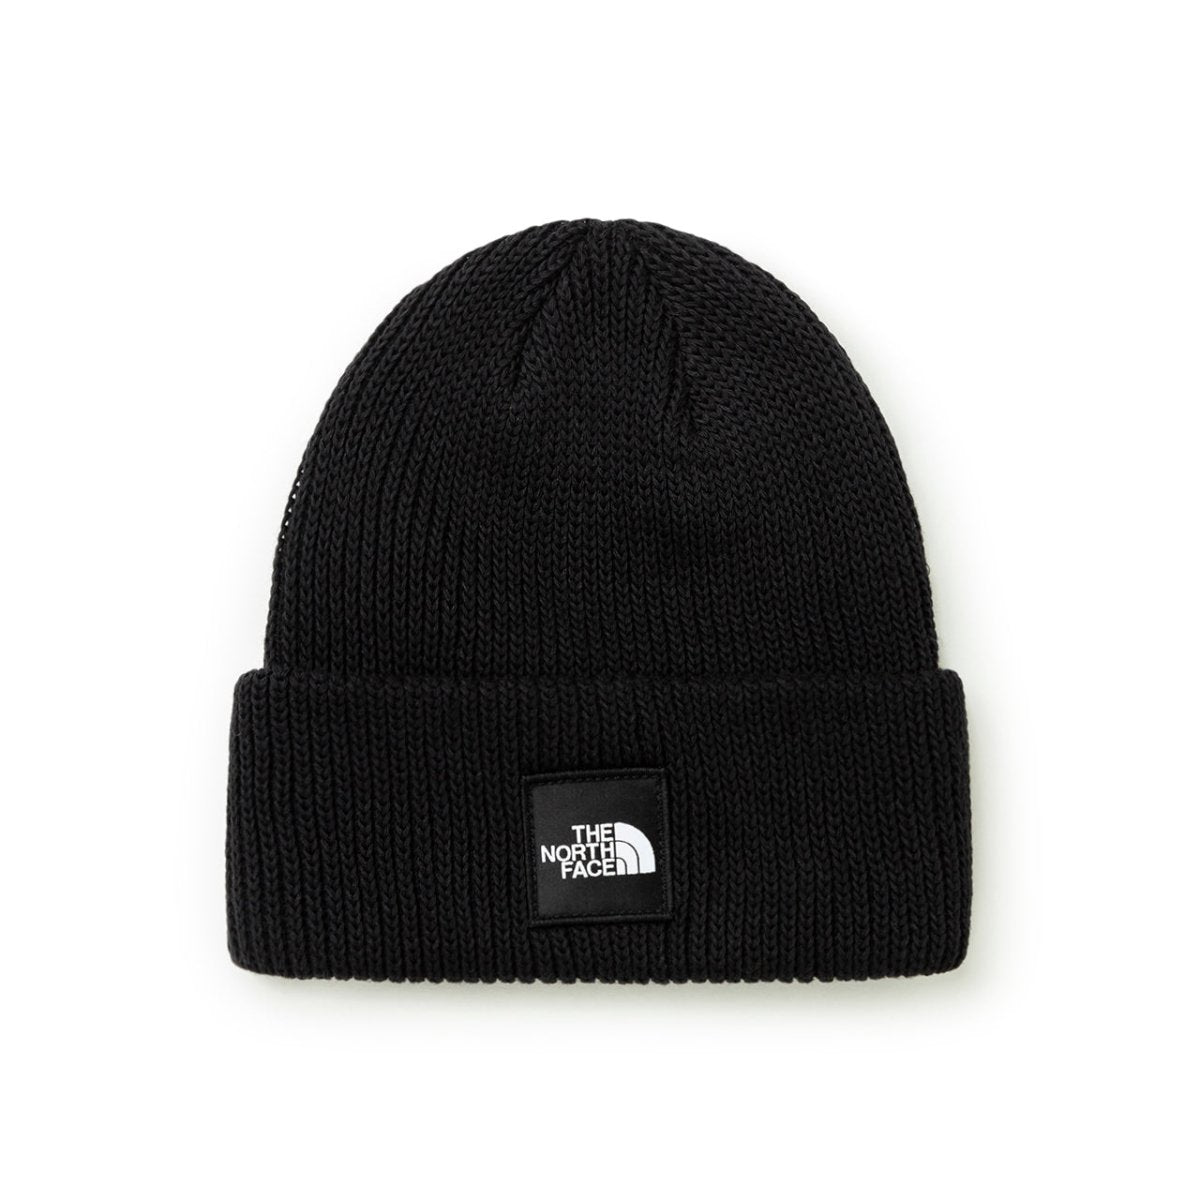 Image of The North Face Black Box Beanie (Schwarz)